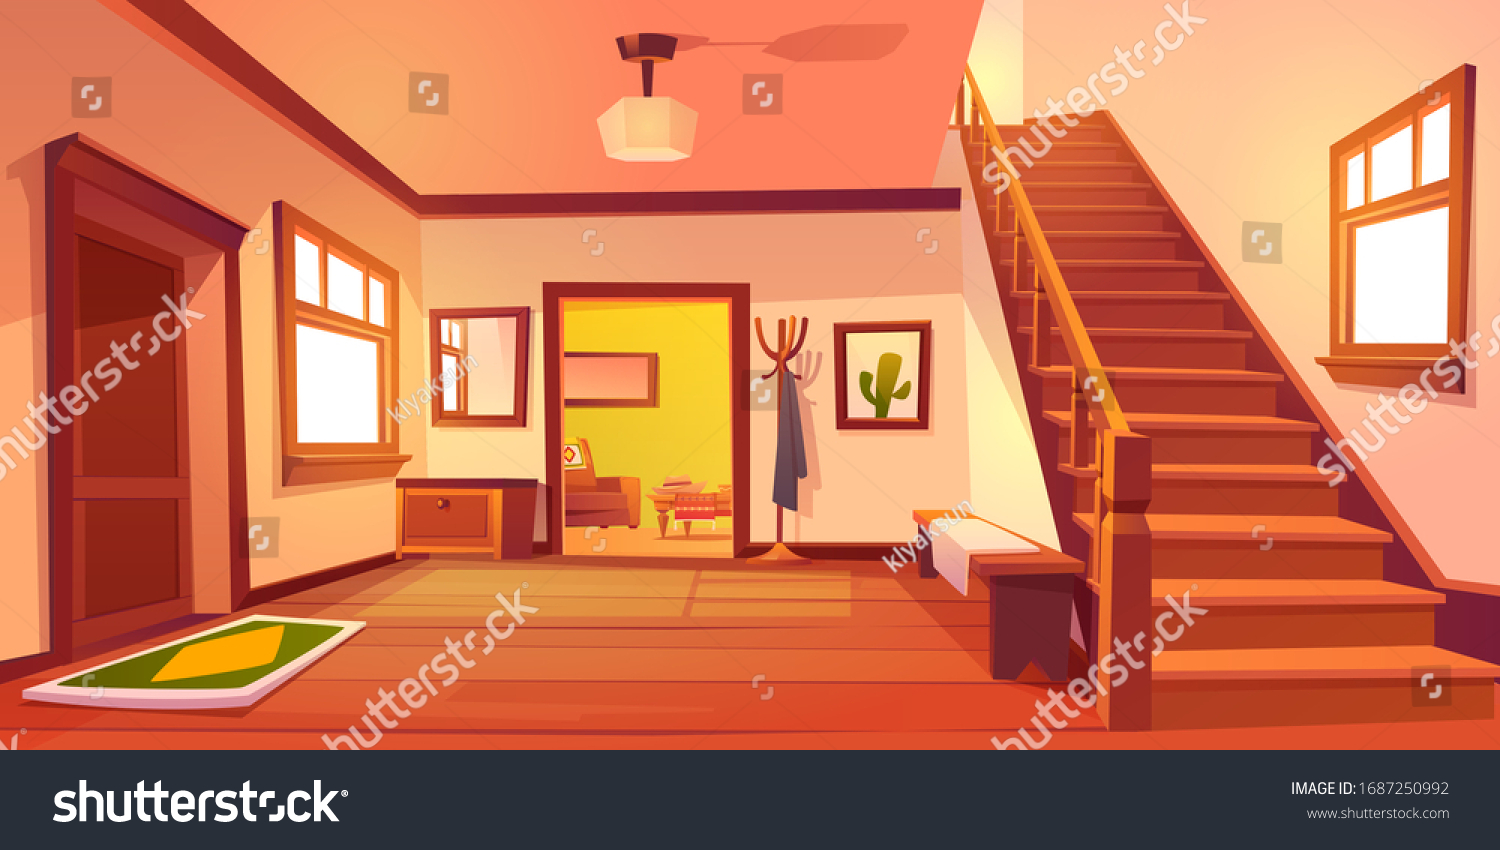 Rustic house hallway entrance interior with wooden stairs and furniture. Western style apartment with door, hanger, carpet, cowboy hat on table and cactus picture on wall. Cartoon vector illustration. #1687250992